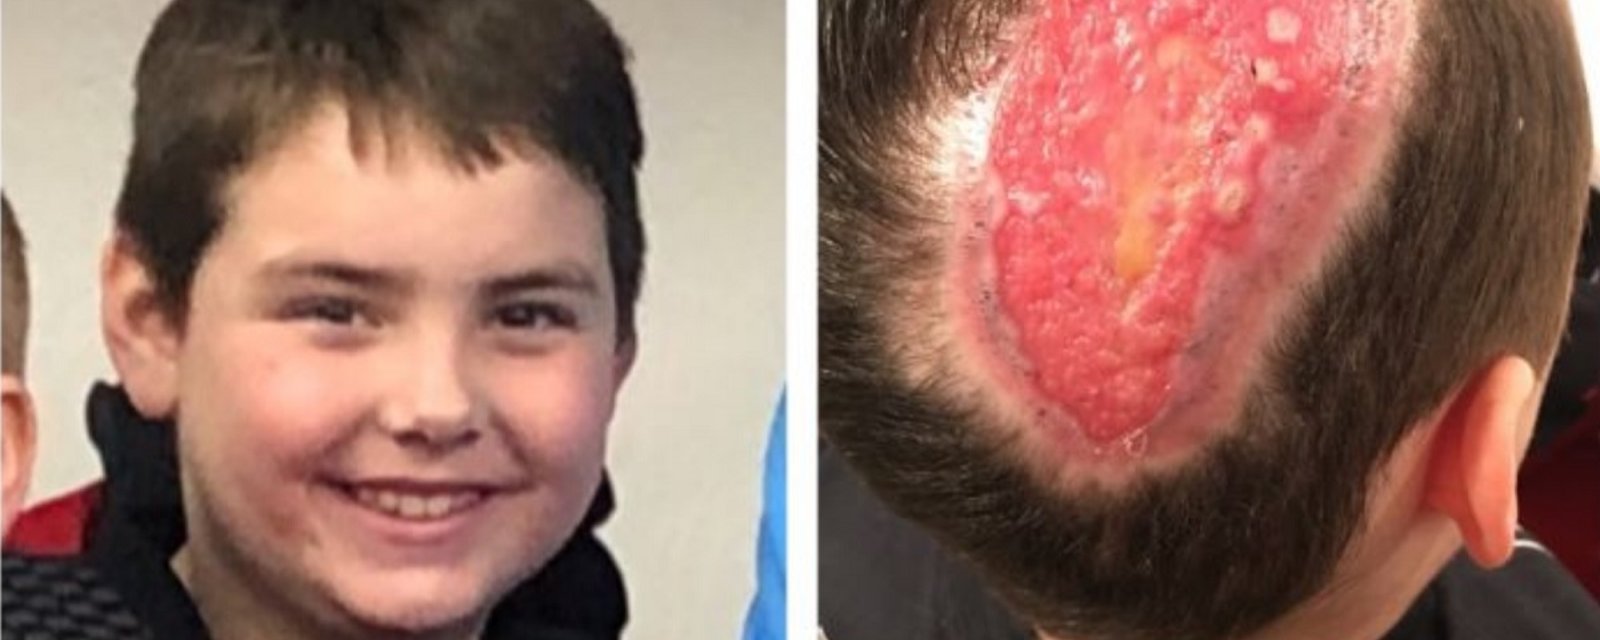 Young hockey player suffers gruesome injury in horrific attack.